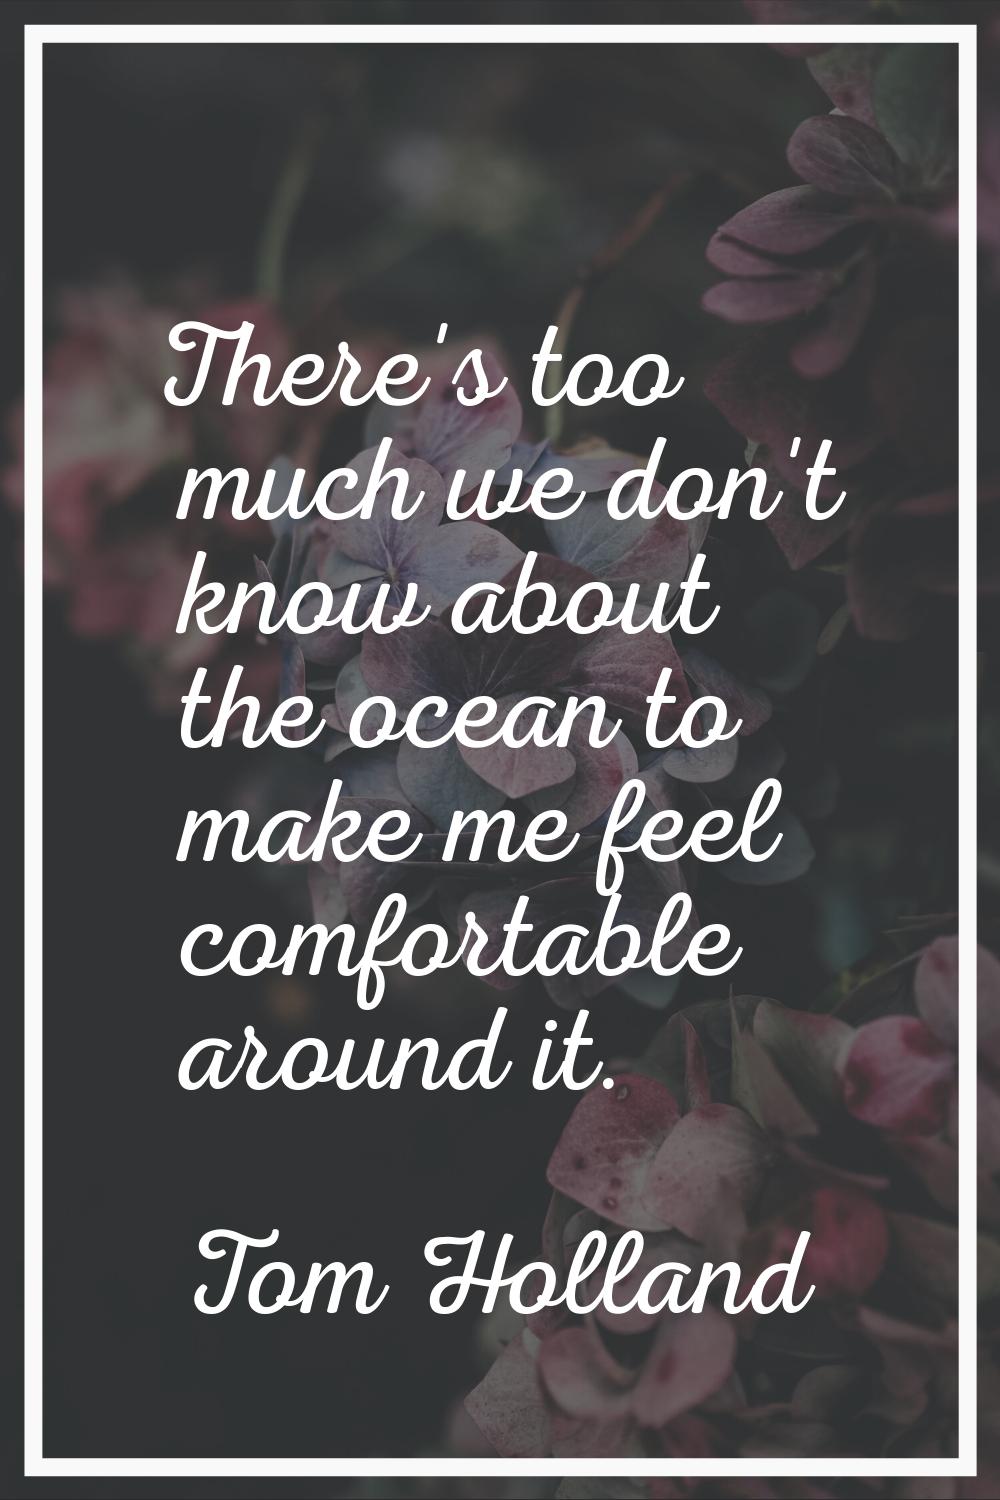 There's too much we don't know about the ocean to make me feel comfortable around it.